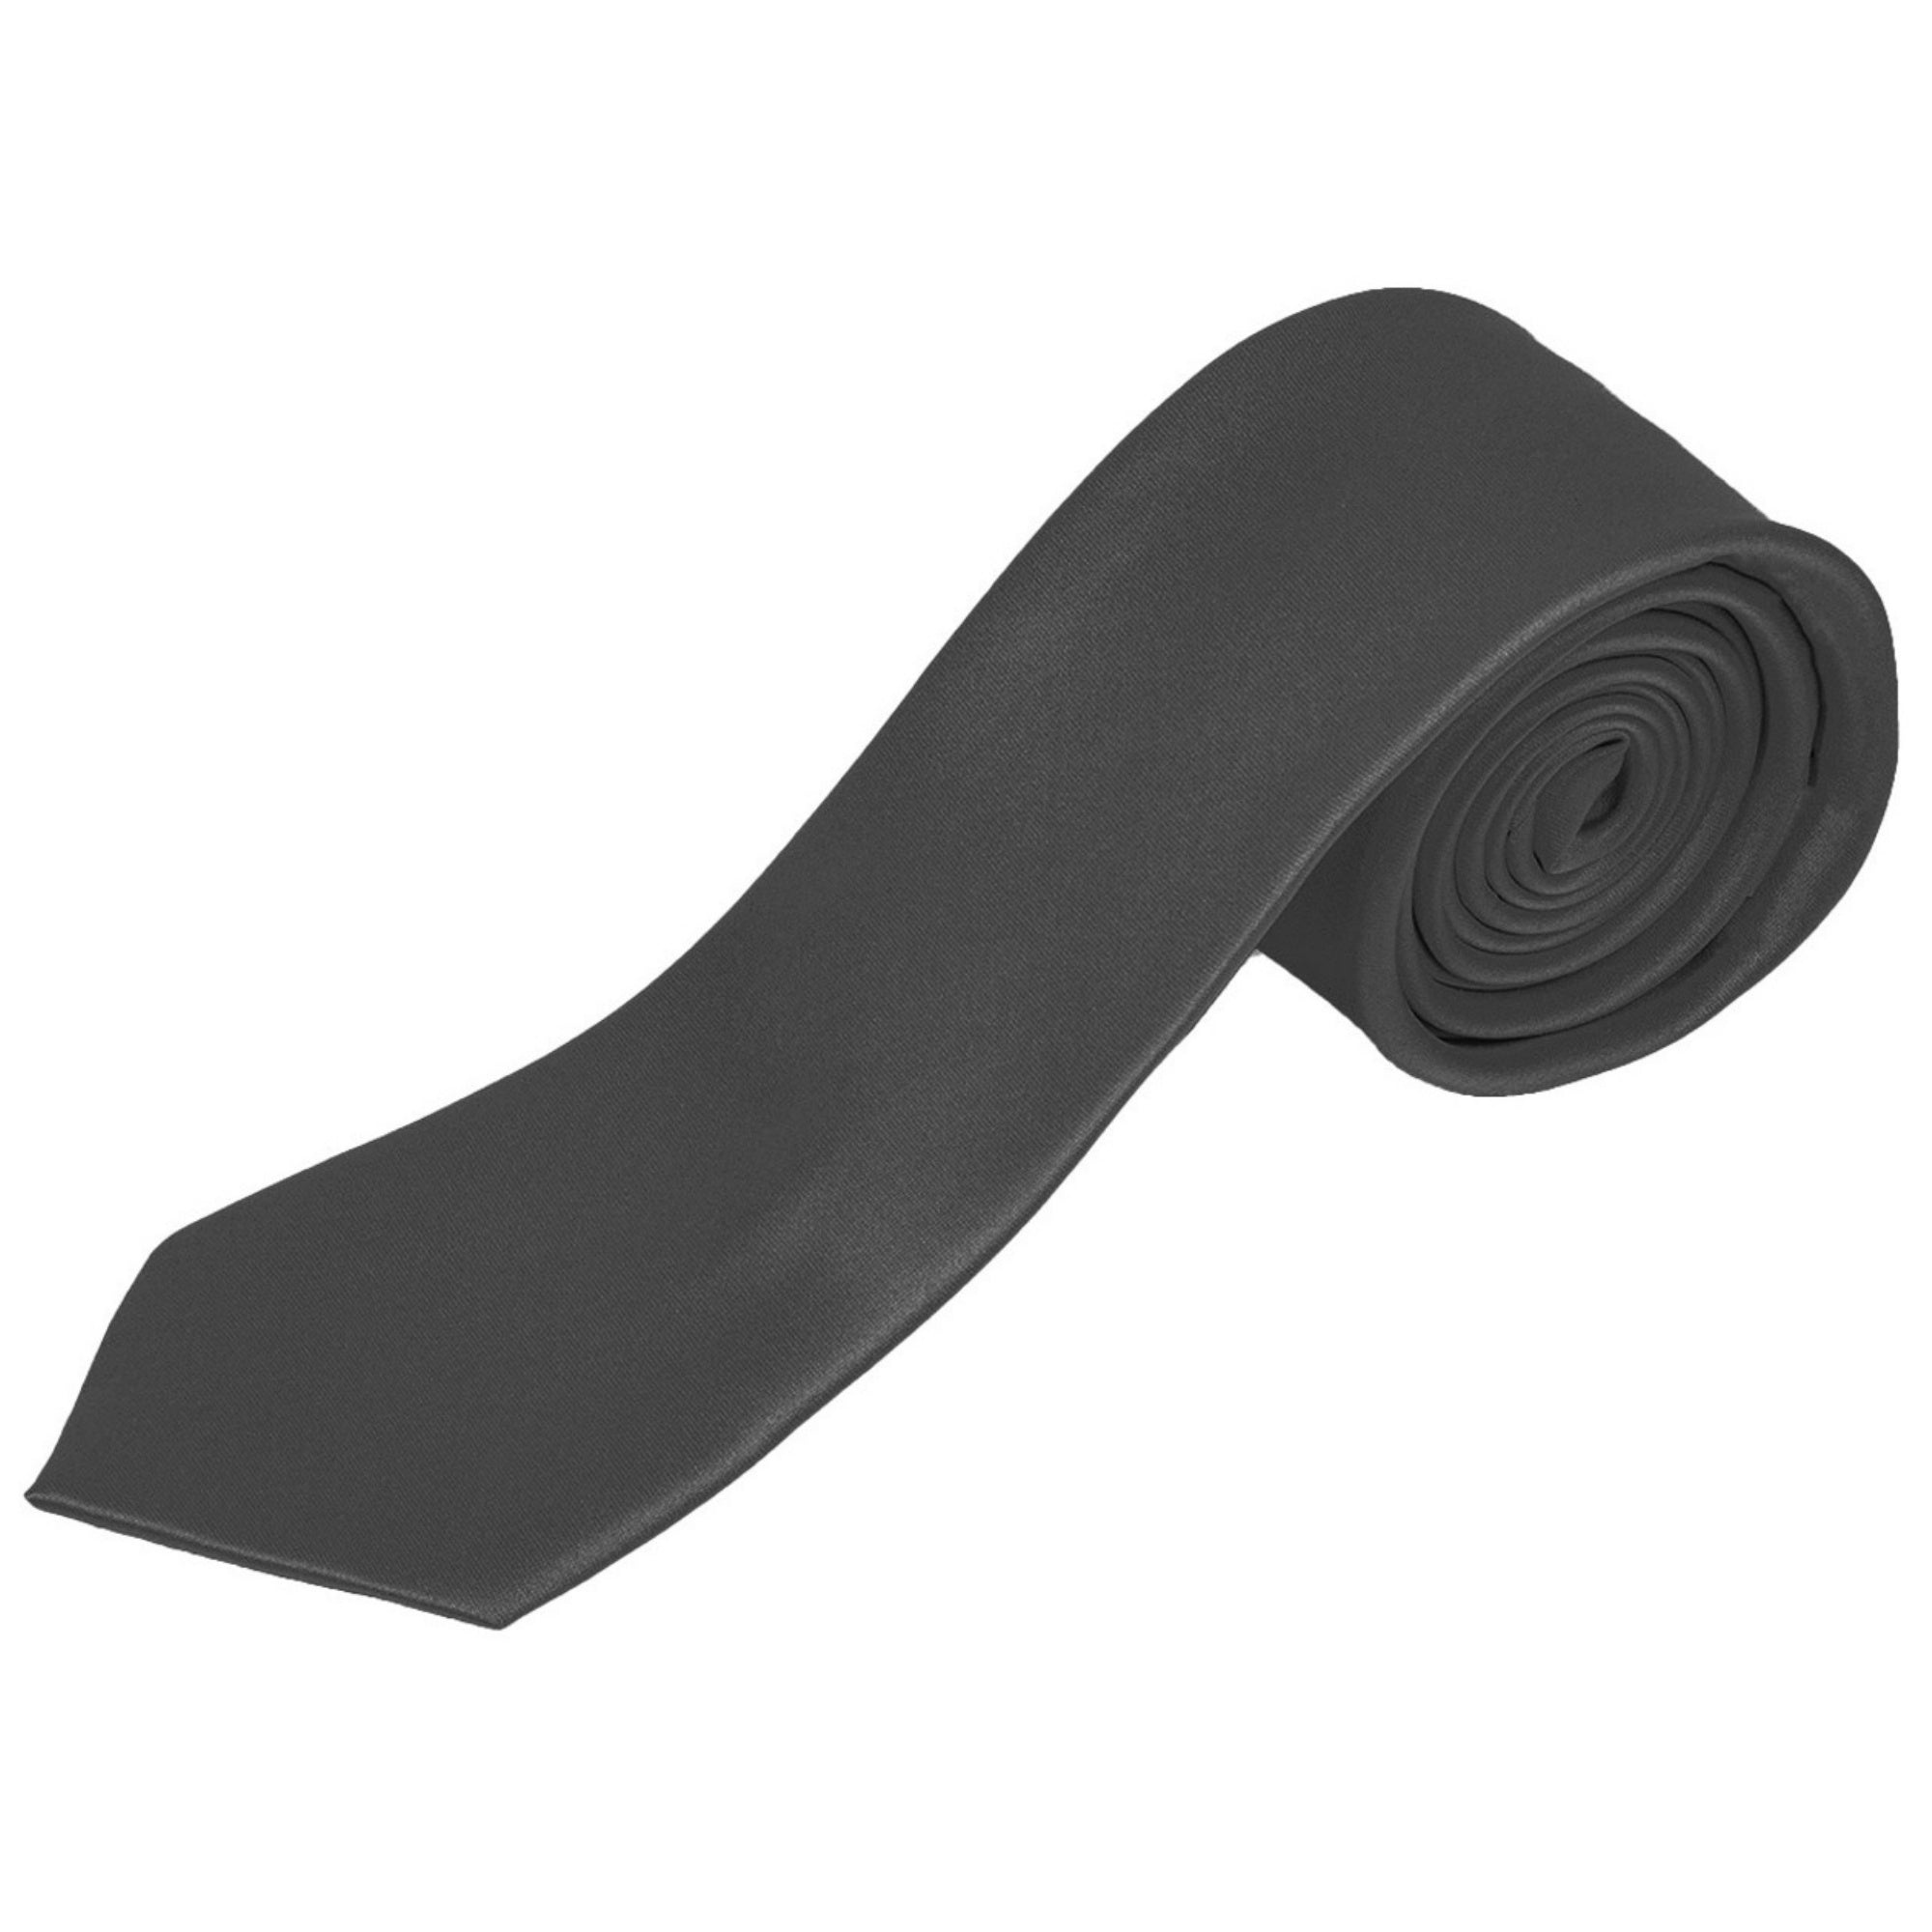 Men's Solid Color 2 Inch Wide And 57 Inch Long Slim Neckties Neck Tie TheDapperTie Charcoal Gray 57" long and 2" wide 